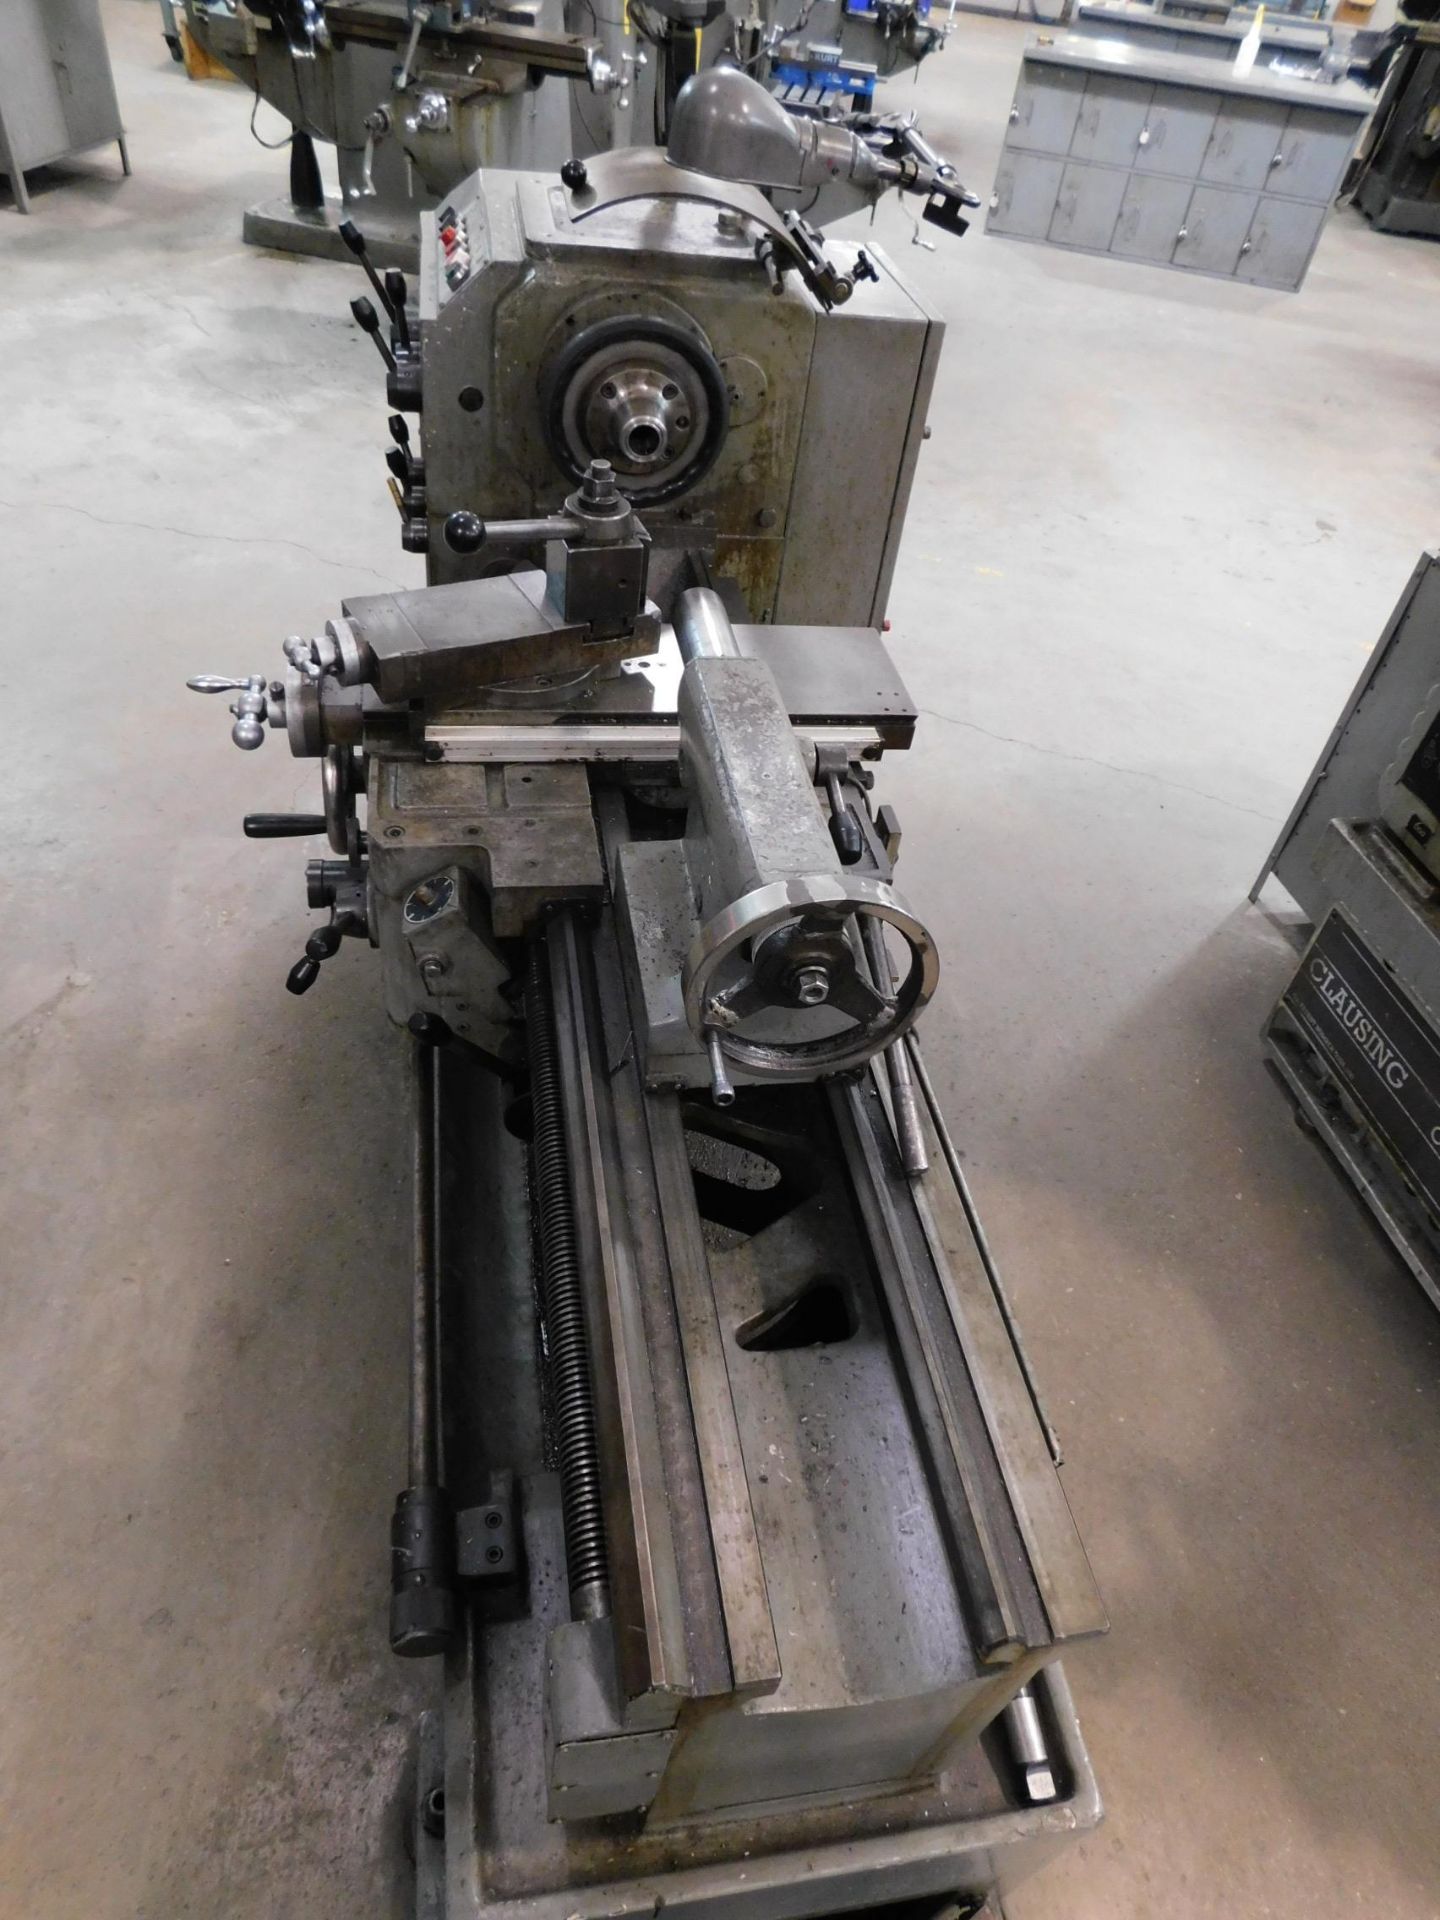 South Bend 400 16" x 36" Toolroom Lathe, SN 020230, with Anilam Wizard 411 2-Axis Digital Readout - Image 6 of 15